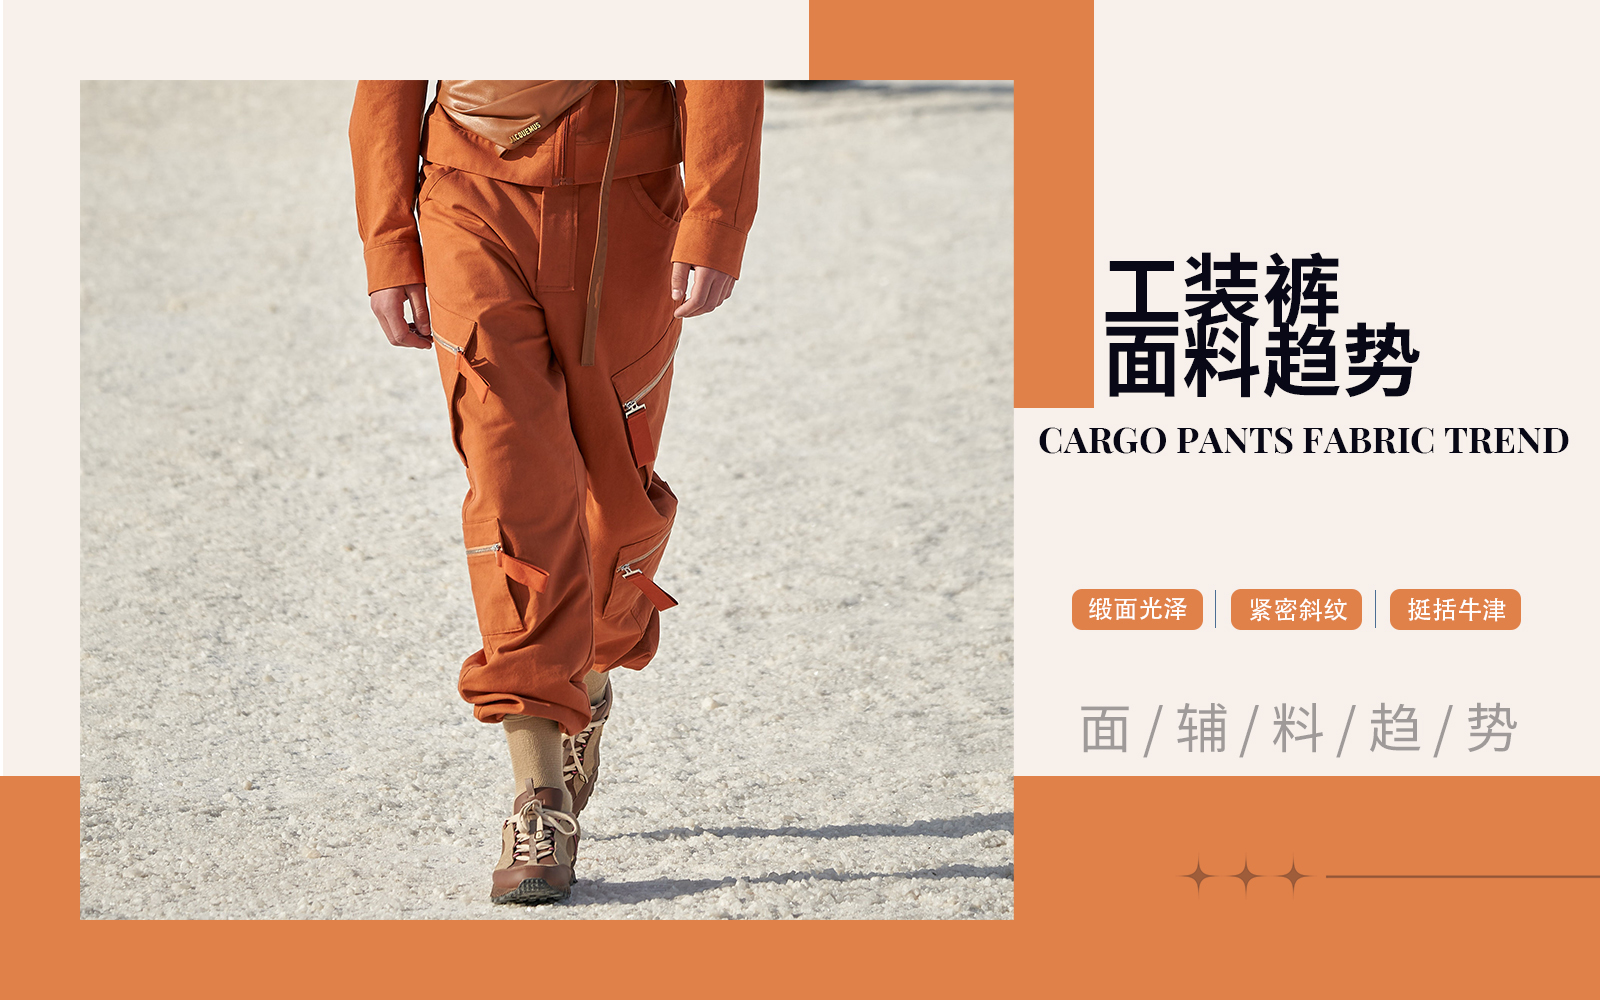 The Fabric Trend for Men's Cargo Pants